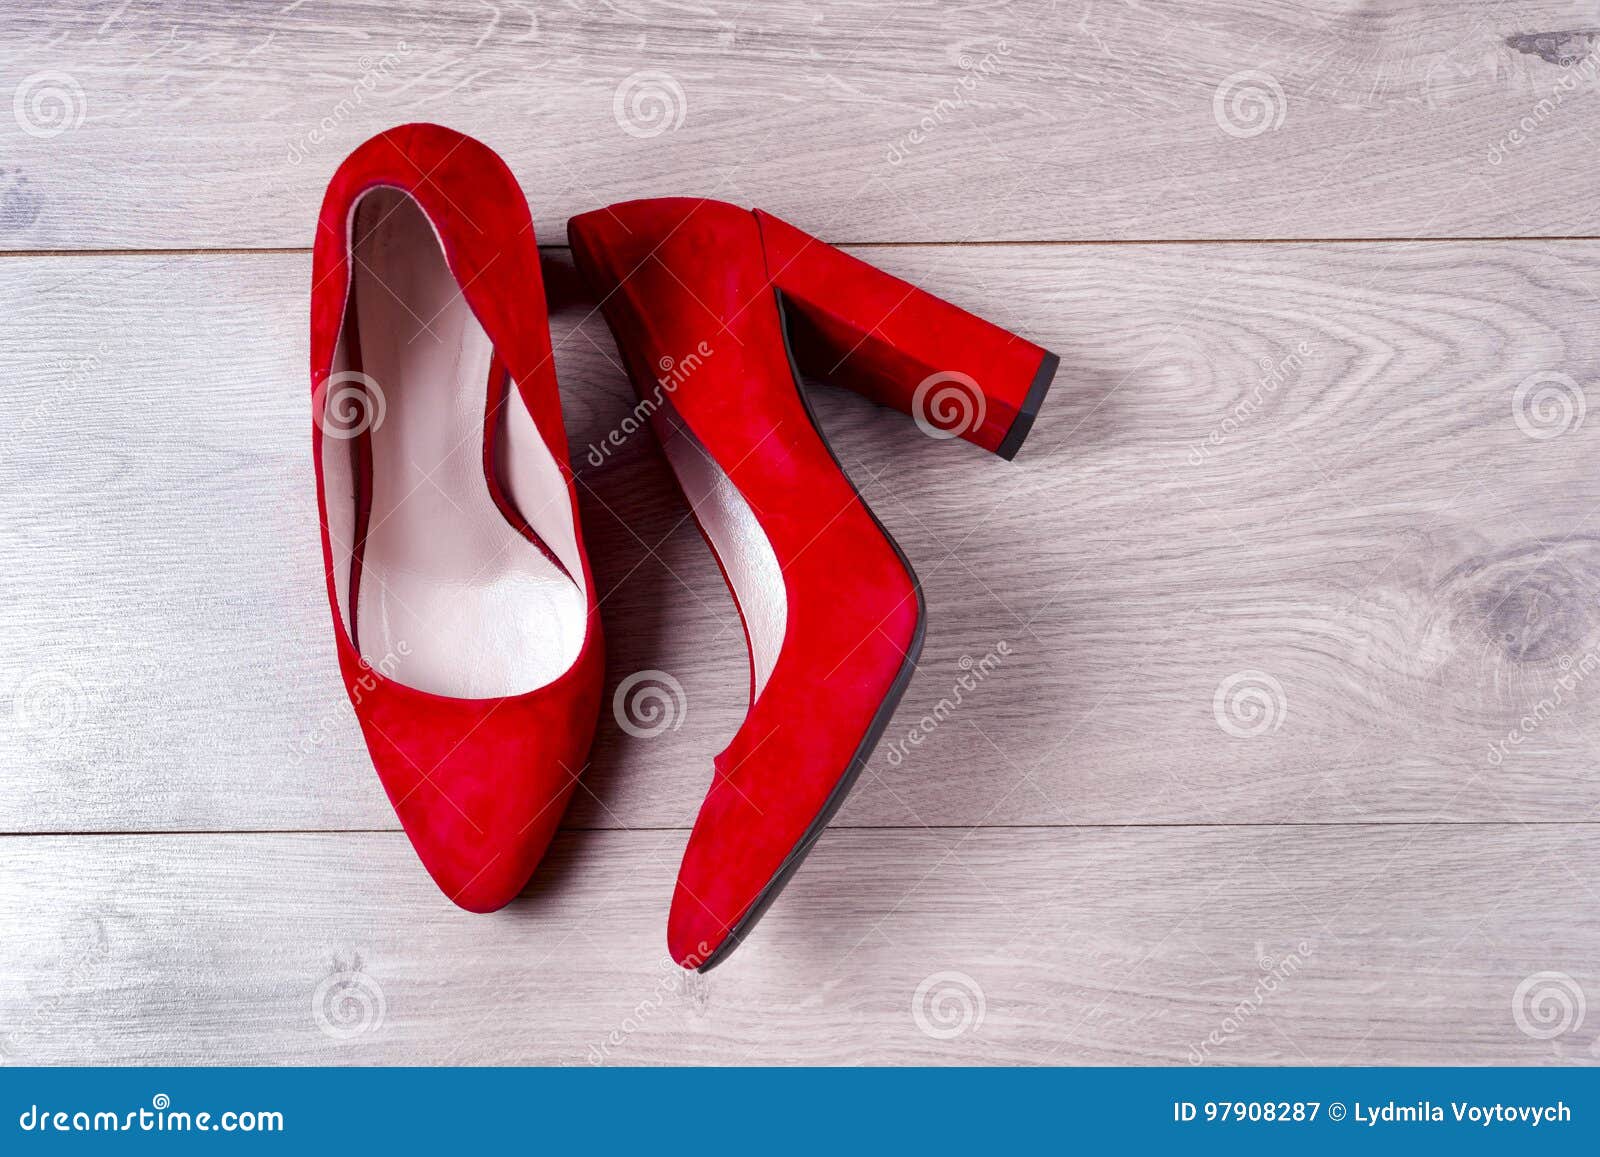 Red Female Shoes on High Heels Stock Image - Image of elegance, casual ...